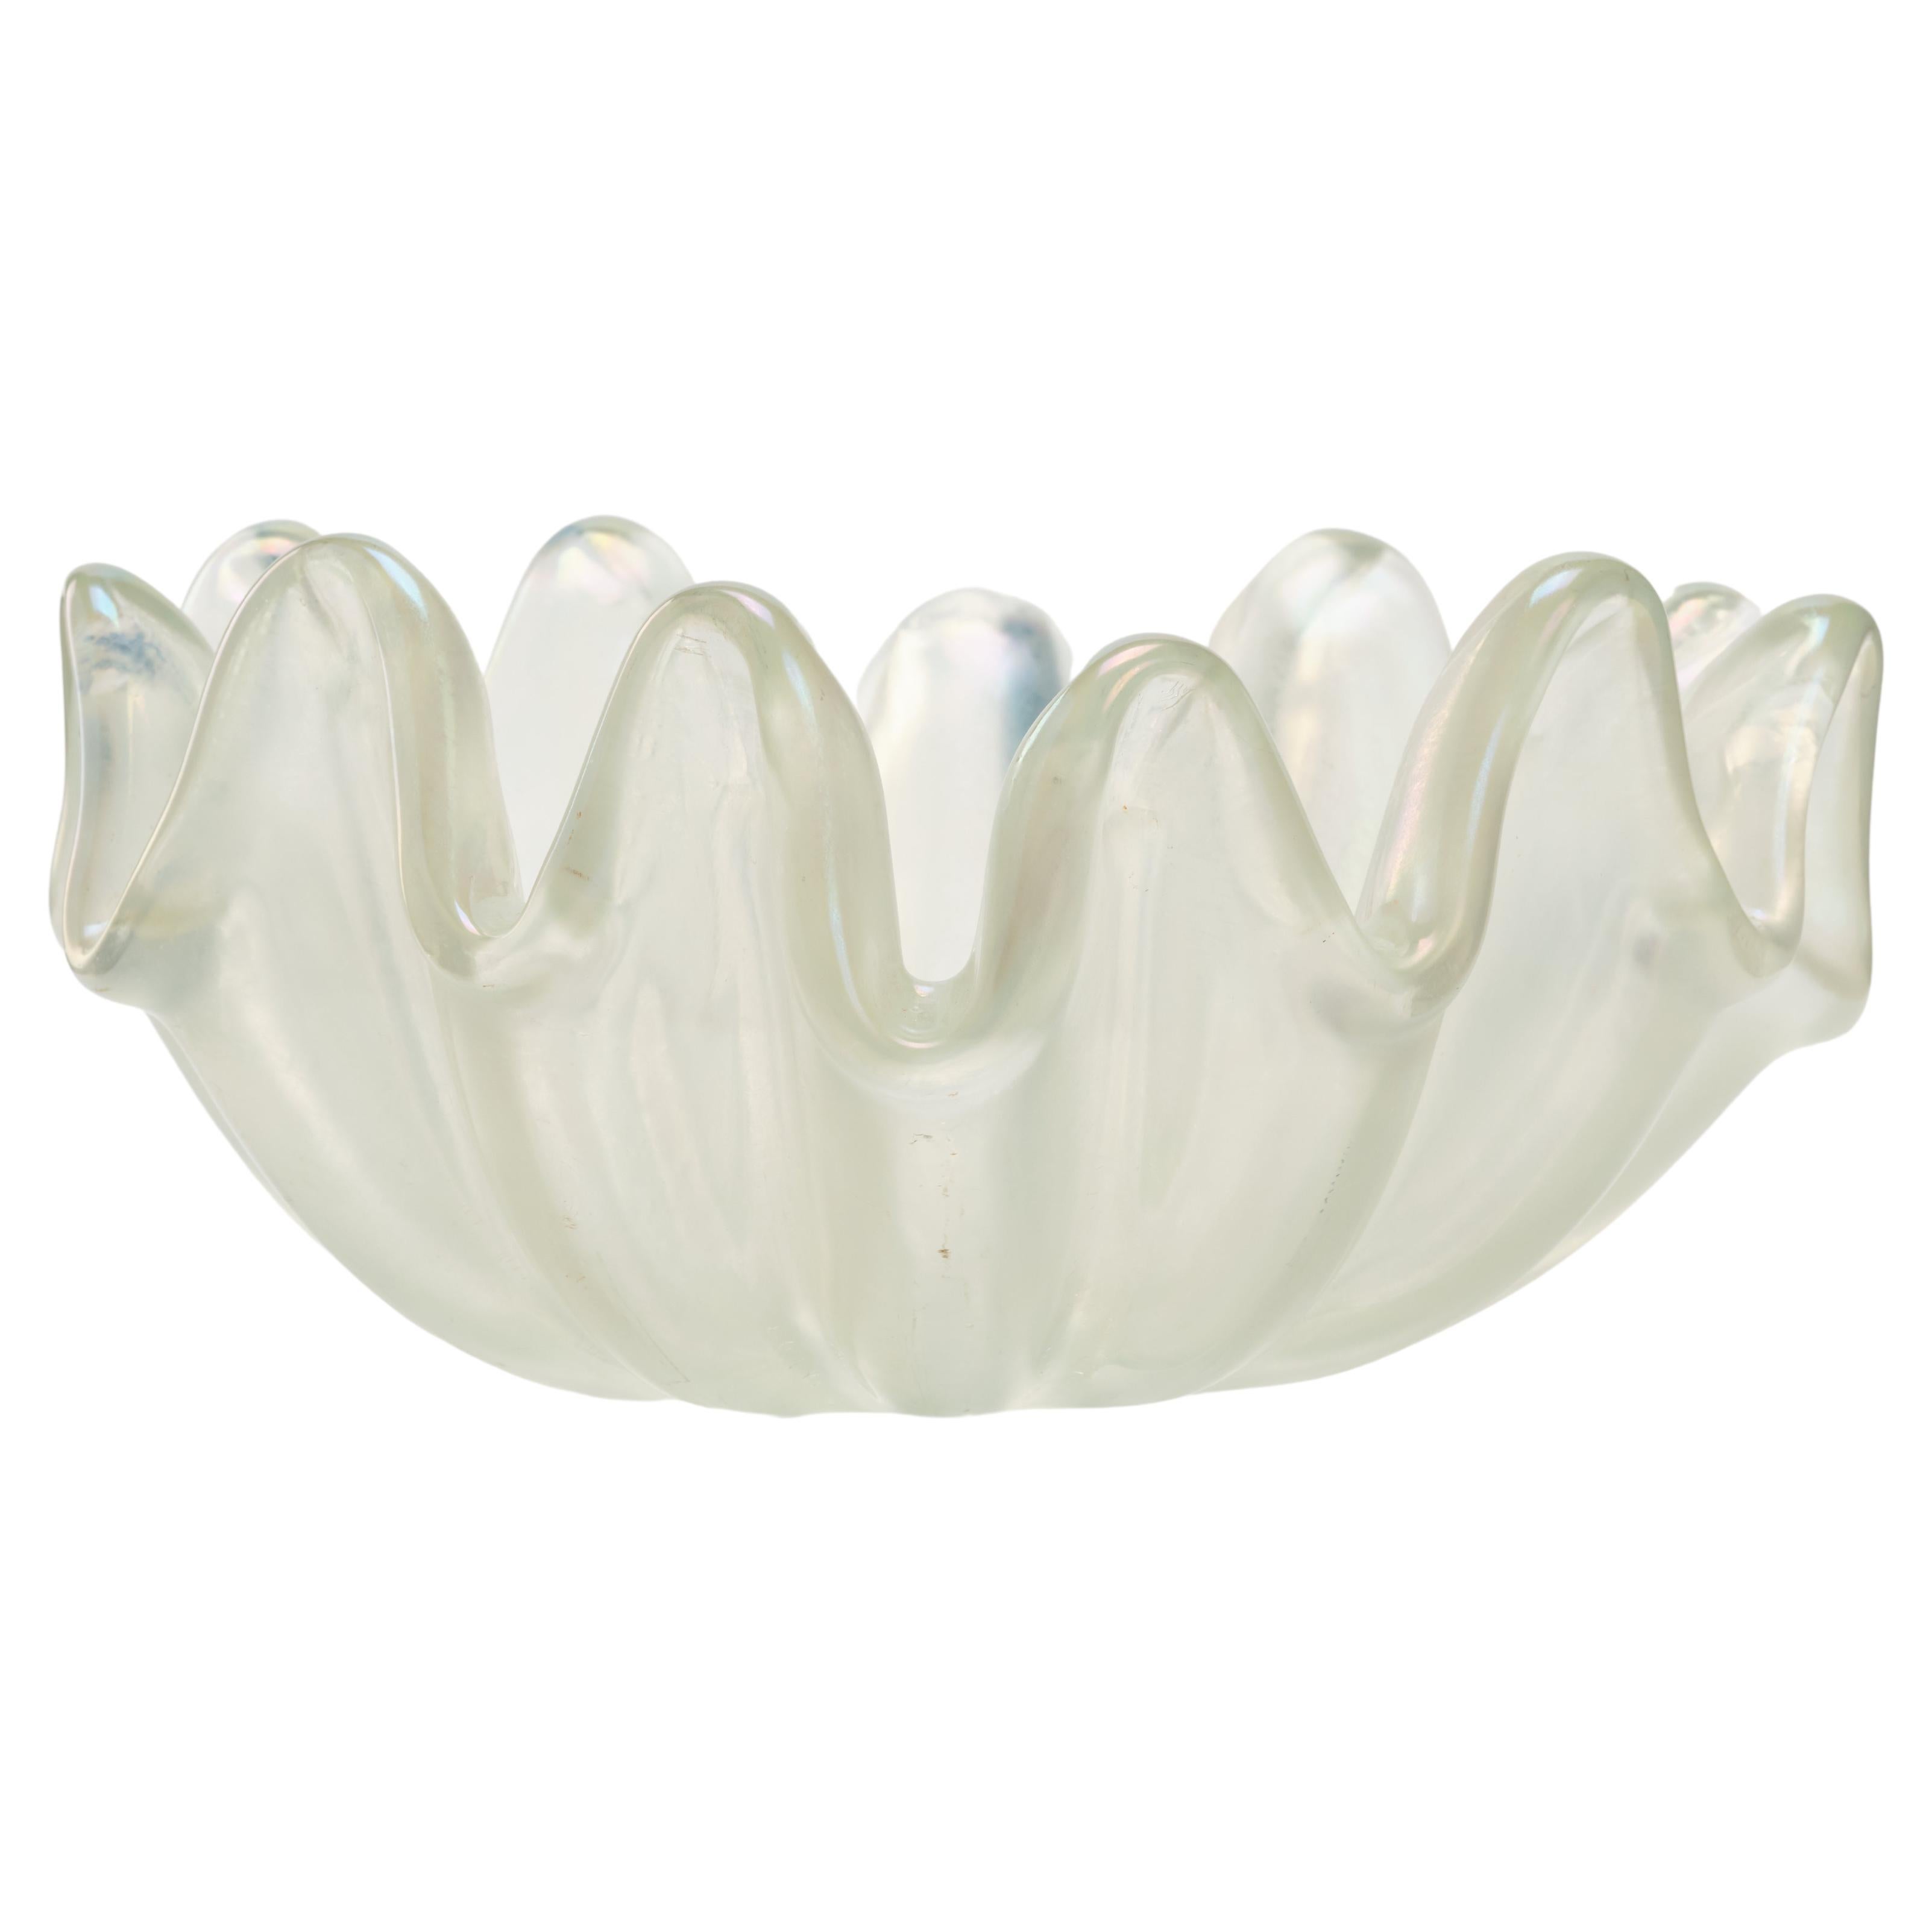 Ercole Barovier Thick wavy shell-shape Murano glass bowl centerpiece - 1950s For Sale